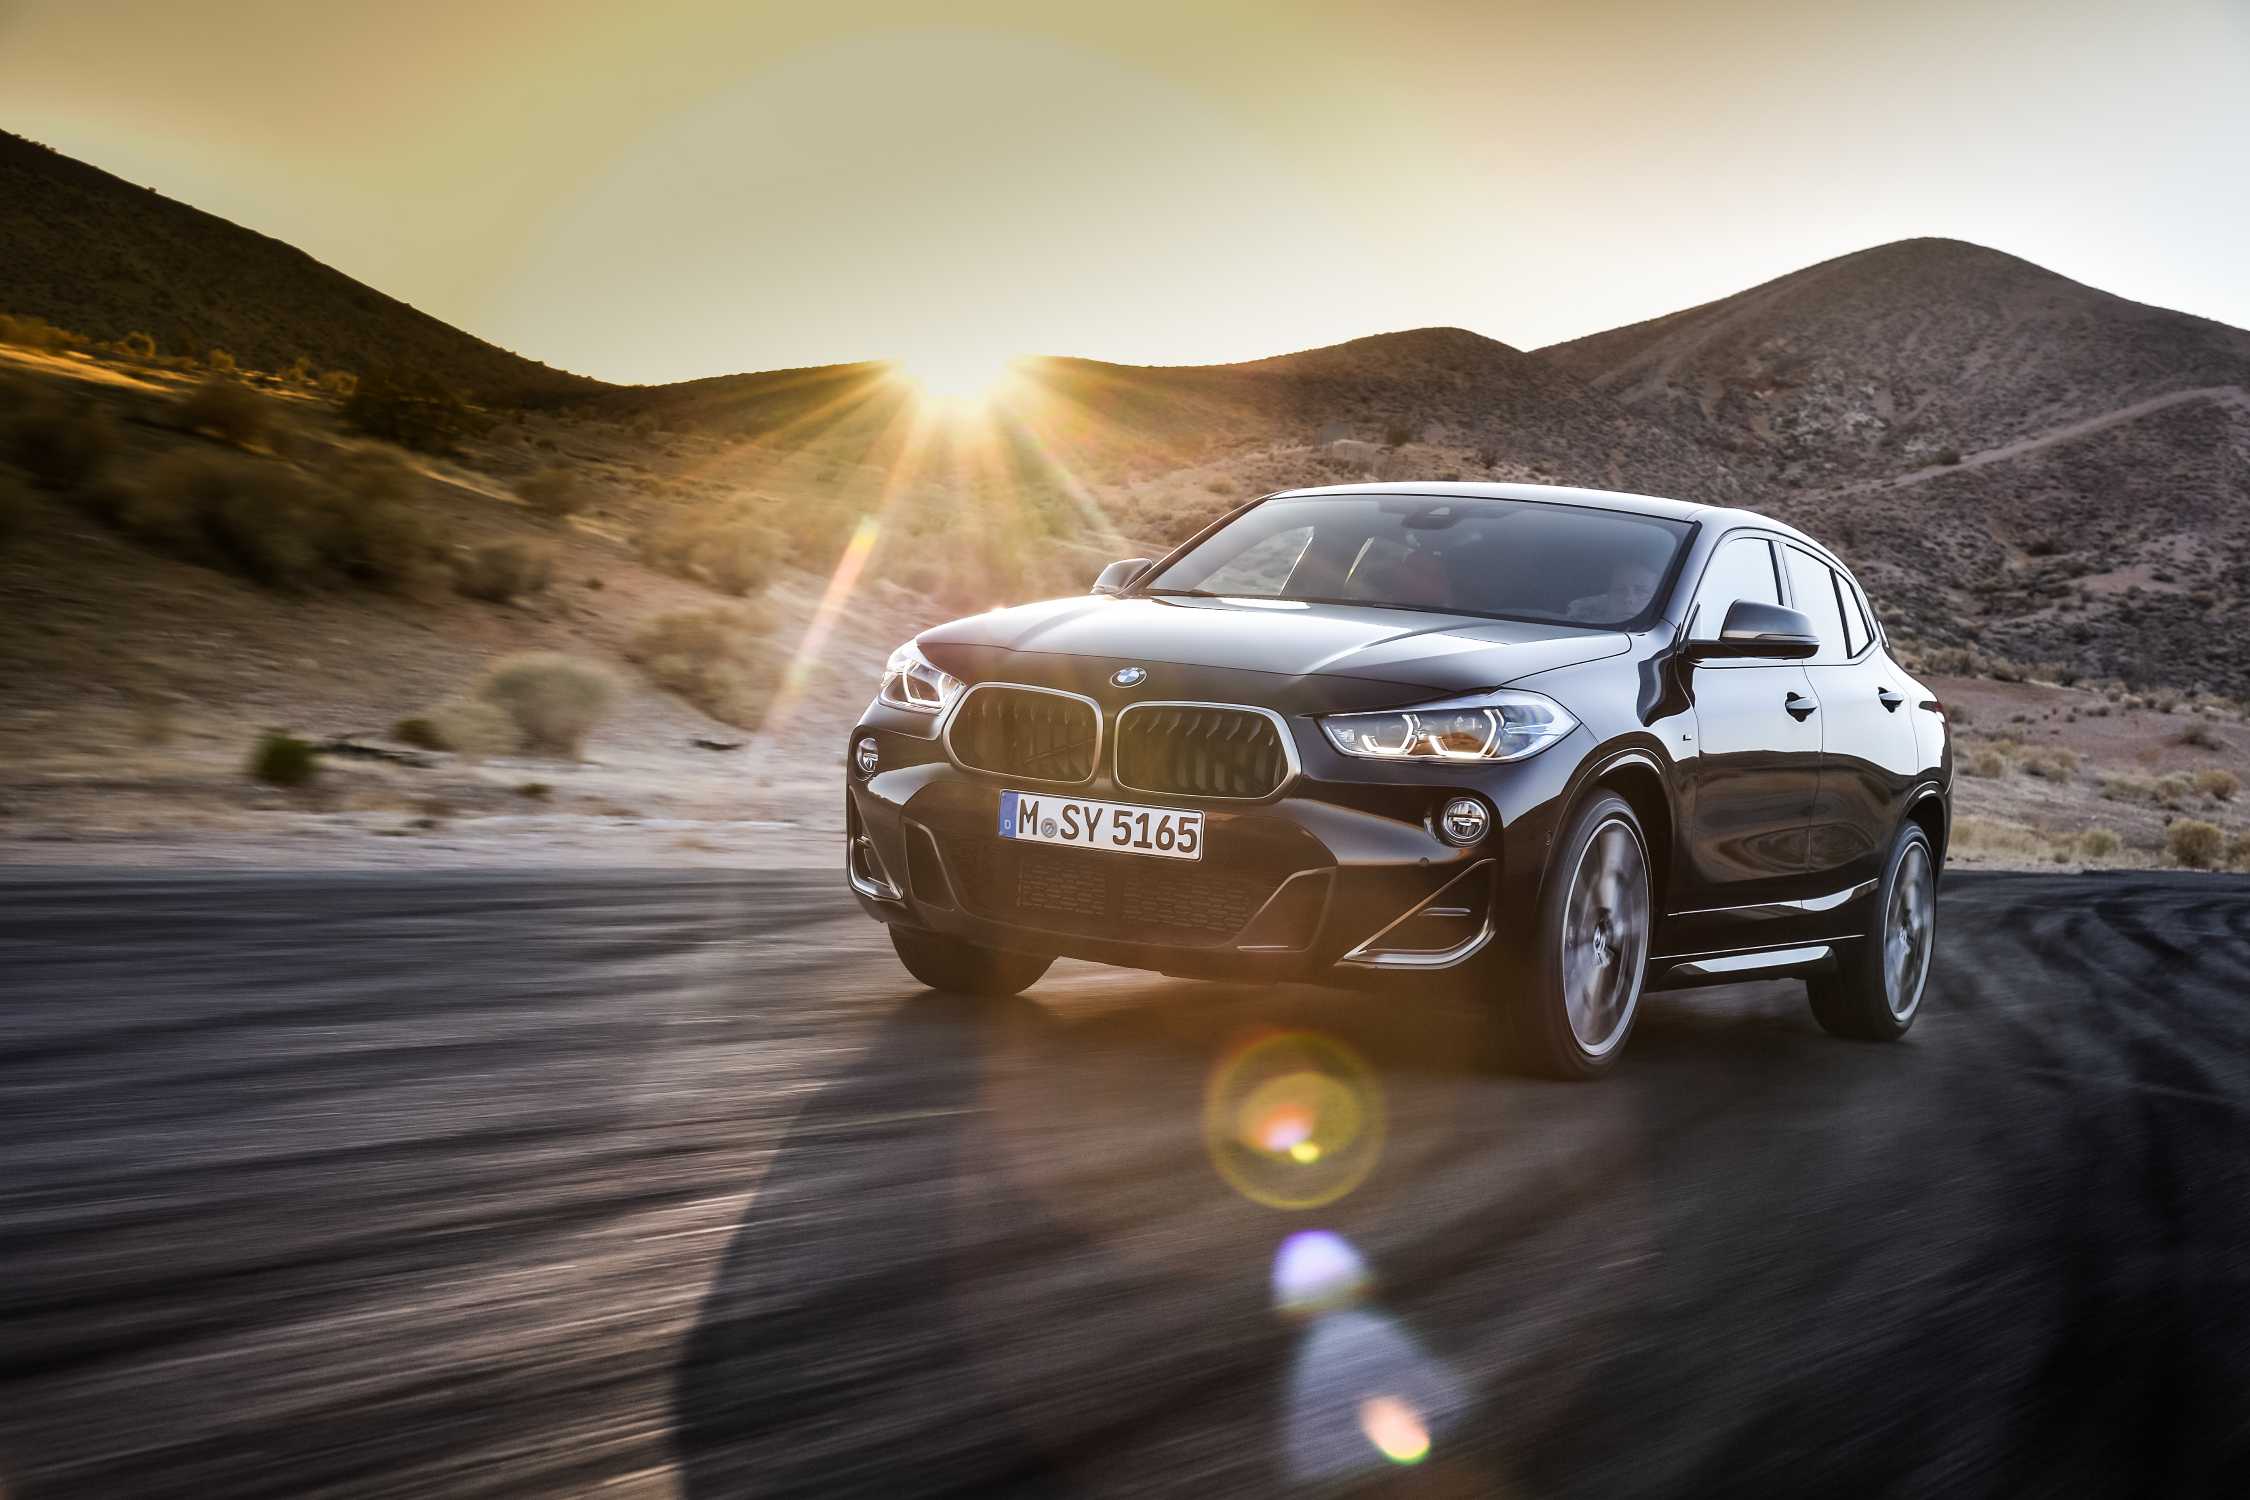 The BMW X2 M35i Edition GoldPlay